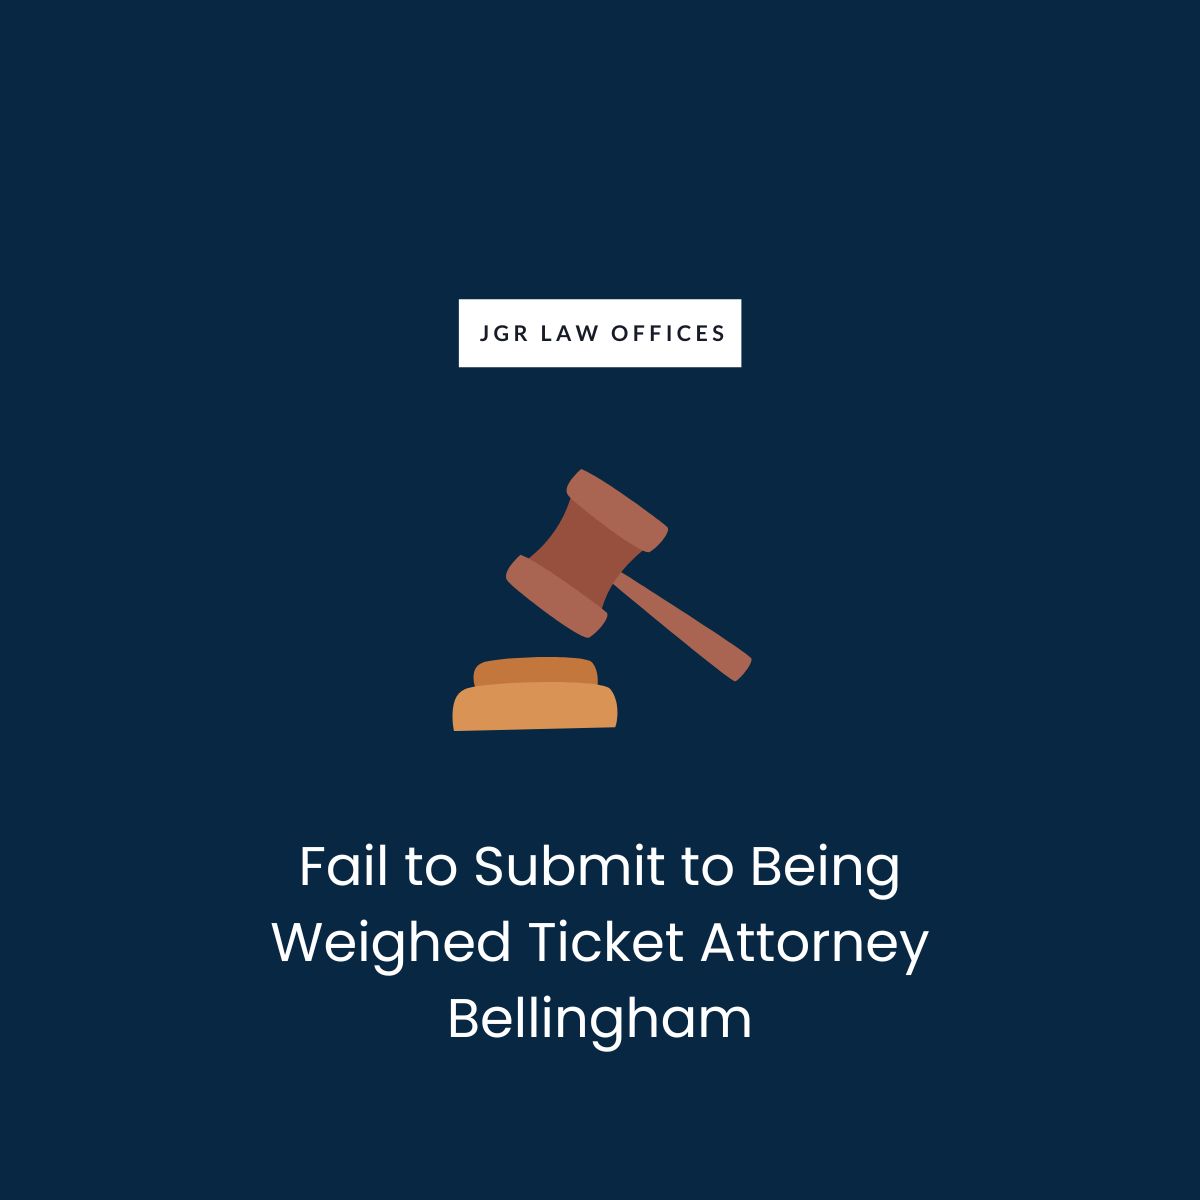 Fail to Submit to Being Weighed Ticket Attorney Bellingham